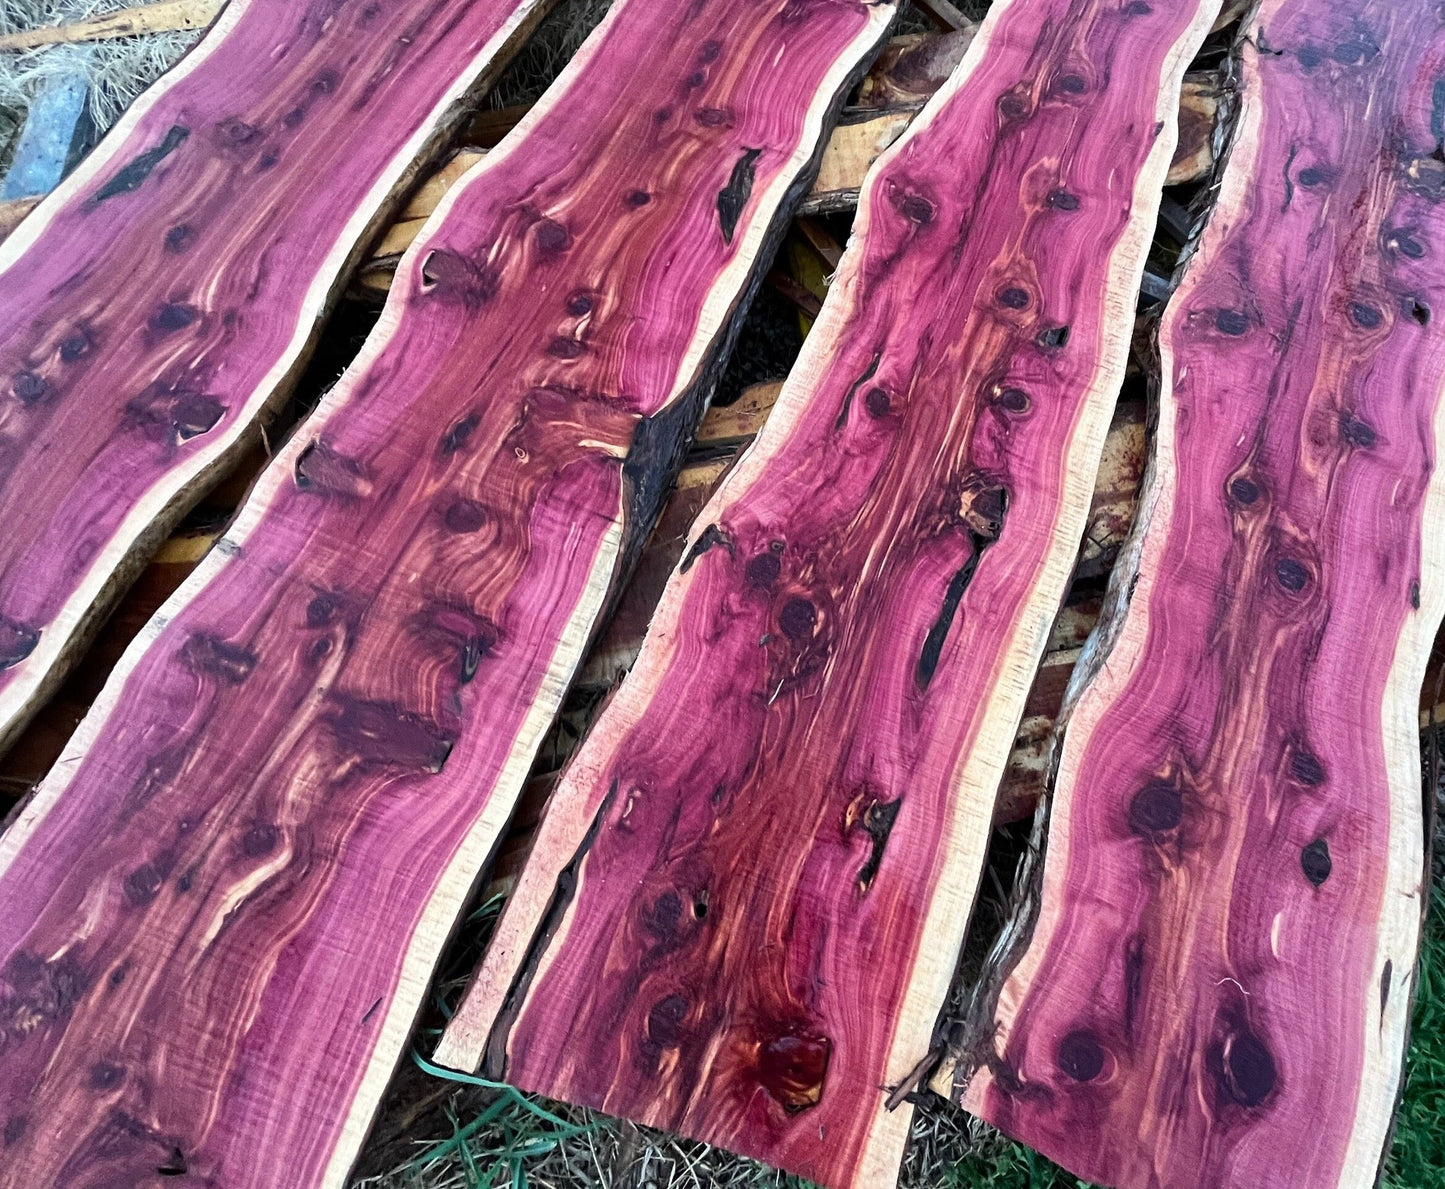 2" Thick Rough Cut Eastern Red Cedar Live Edge Slabs for Charcuterie Boards, Furniture, Table and Bar Tops, Shelves, and More - Kiln Dried